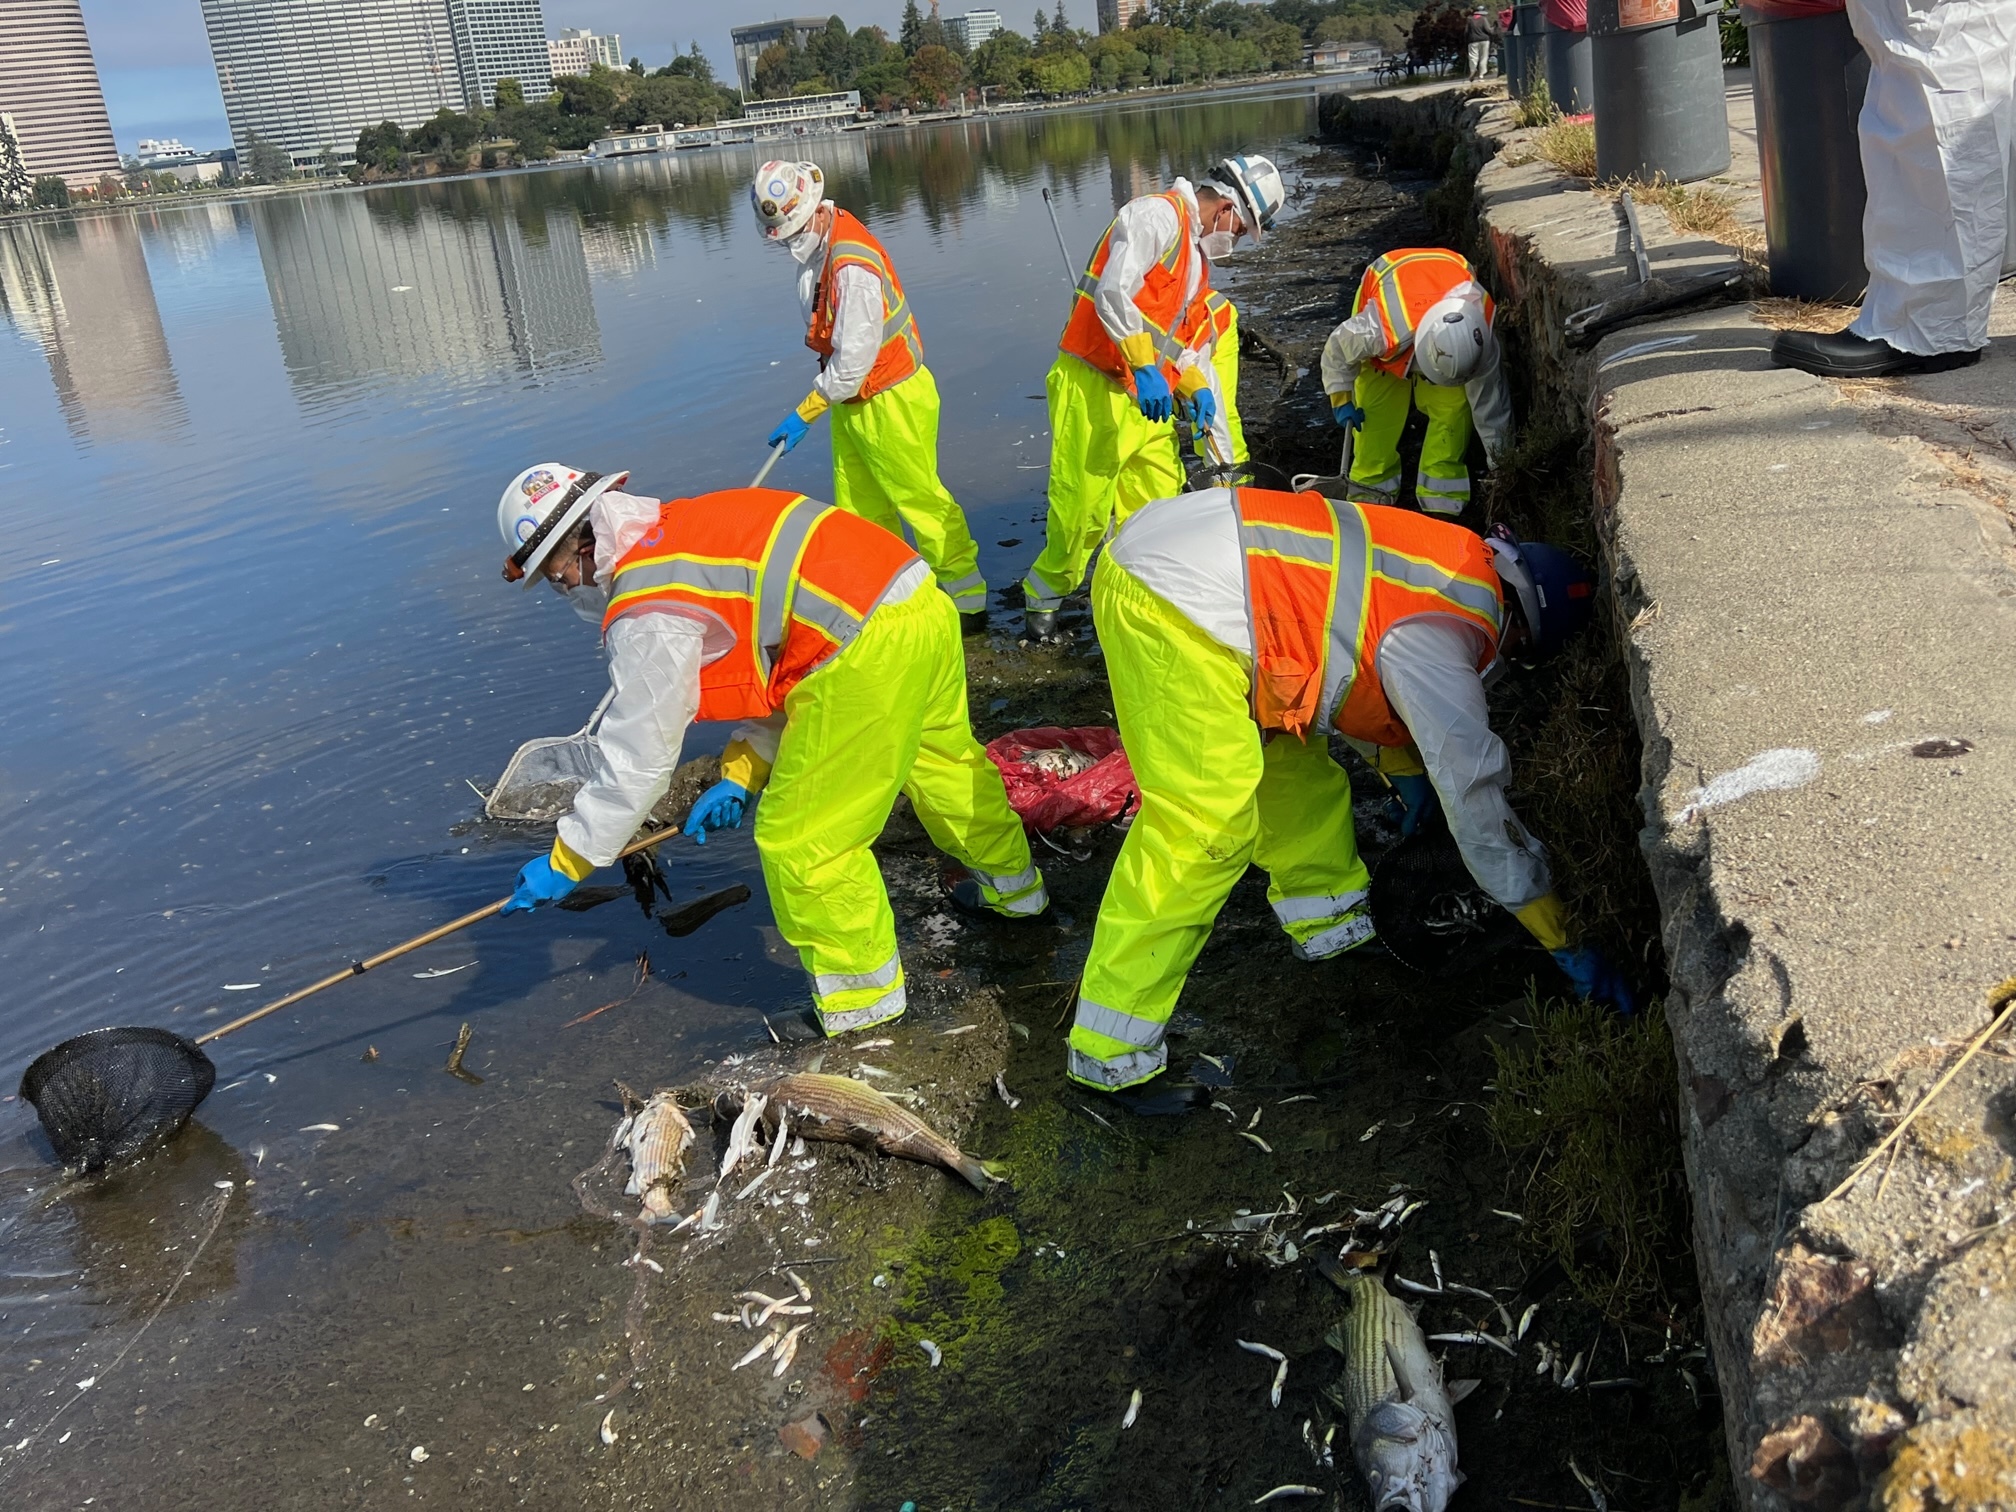 City-contracted crews perform cleanup at Lake Merritt shoreline on 8/31/22